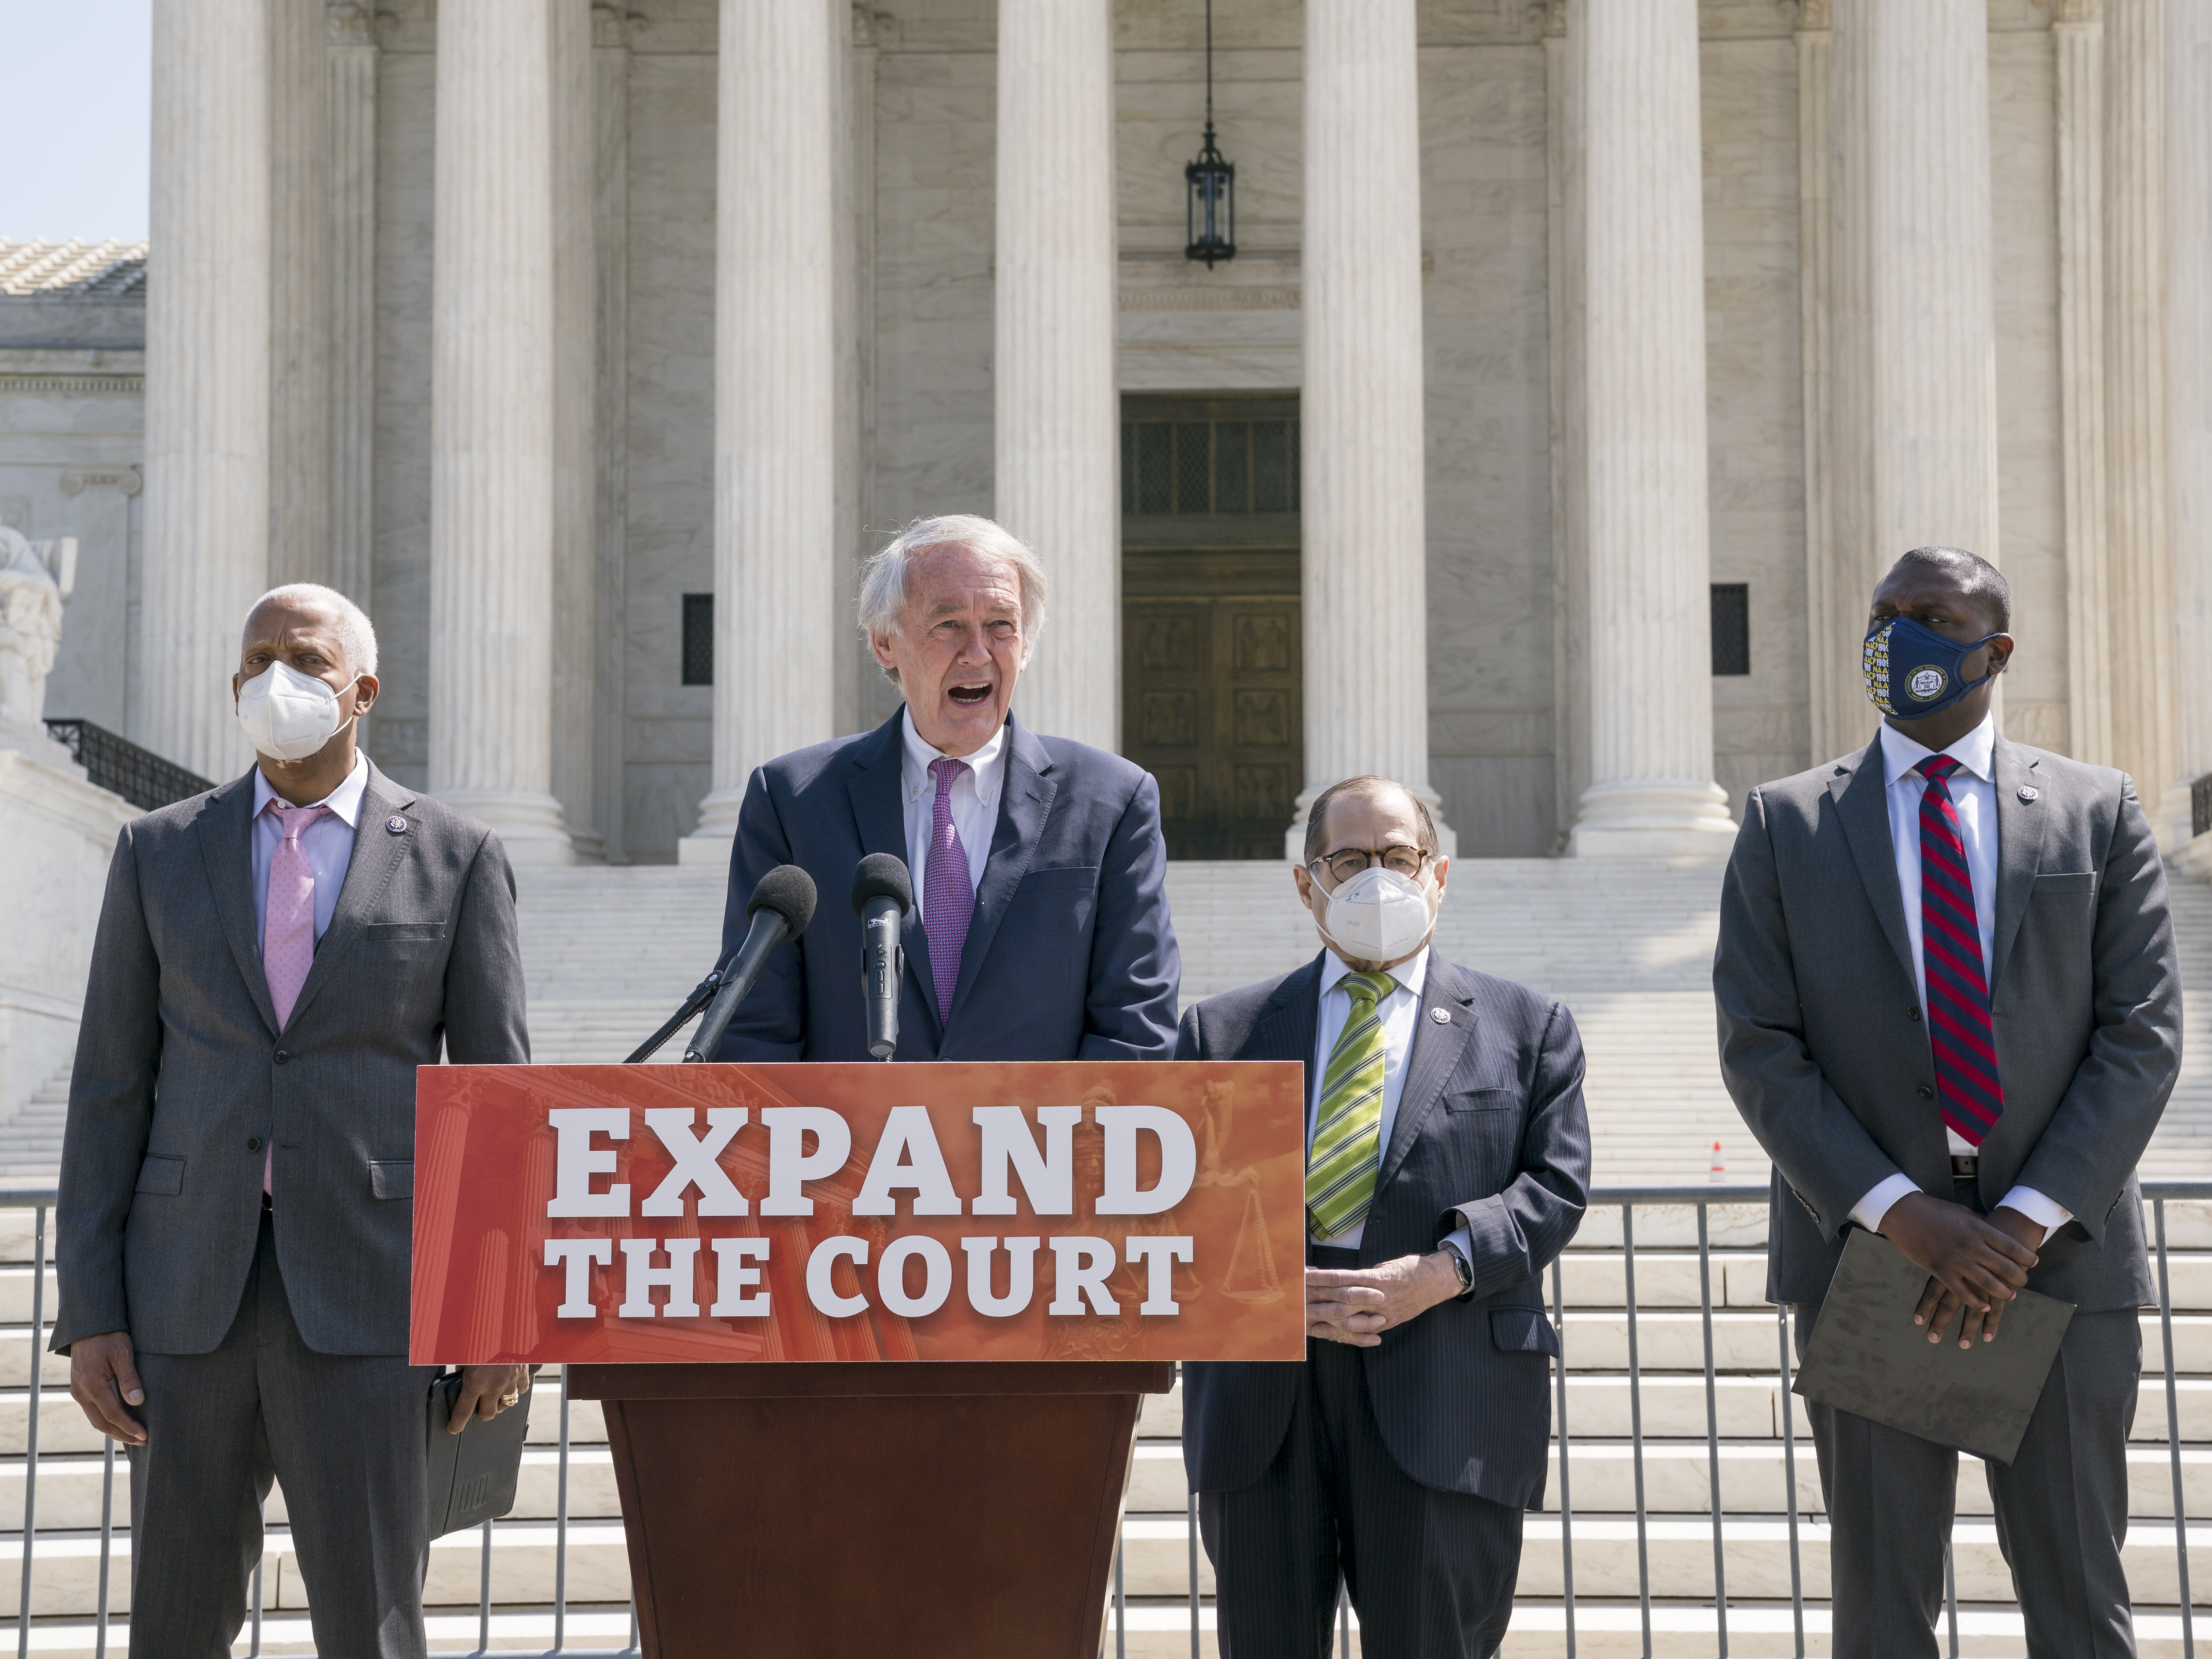 Democratic Rep. Hank Johnson (from left), Sen. Ed Markey, House Judiciary Committee Chairman Jerrold Nadler and Rep. Mondaire Jones announce legislation Thursday to expand the number of seats on the U.S. Supreme Court outside the high court. CREDIT: J. Scott Applewhite/AP